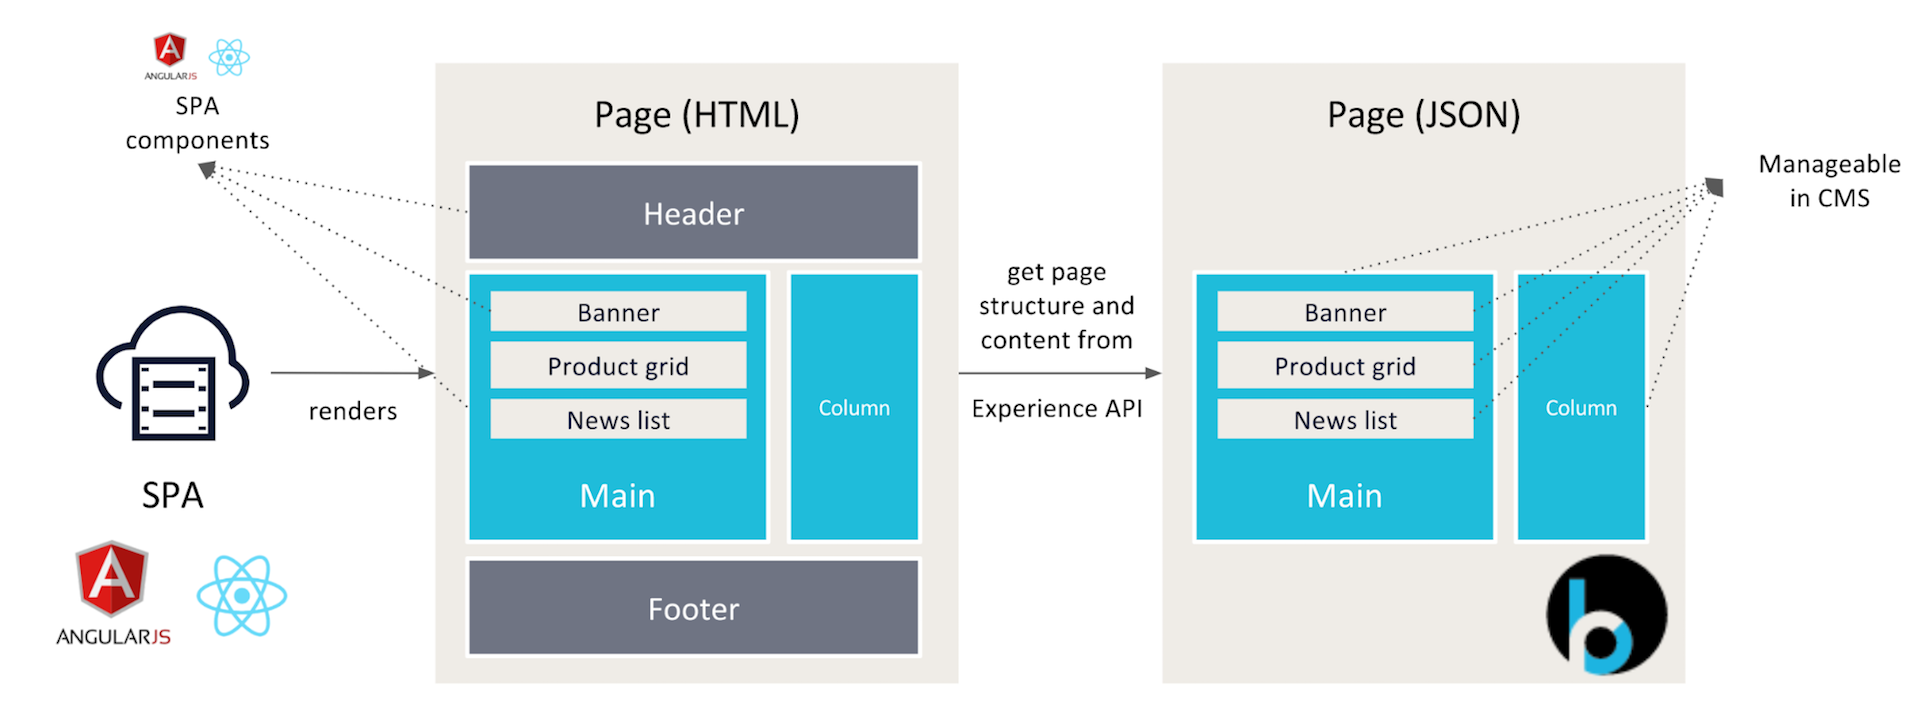 BloomReach Page Model API Architecture